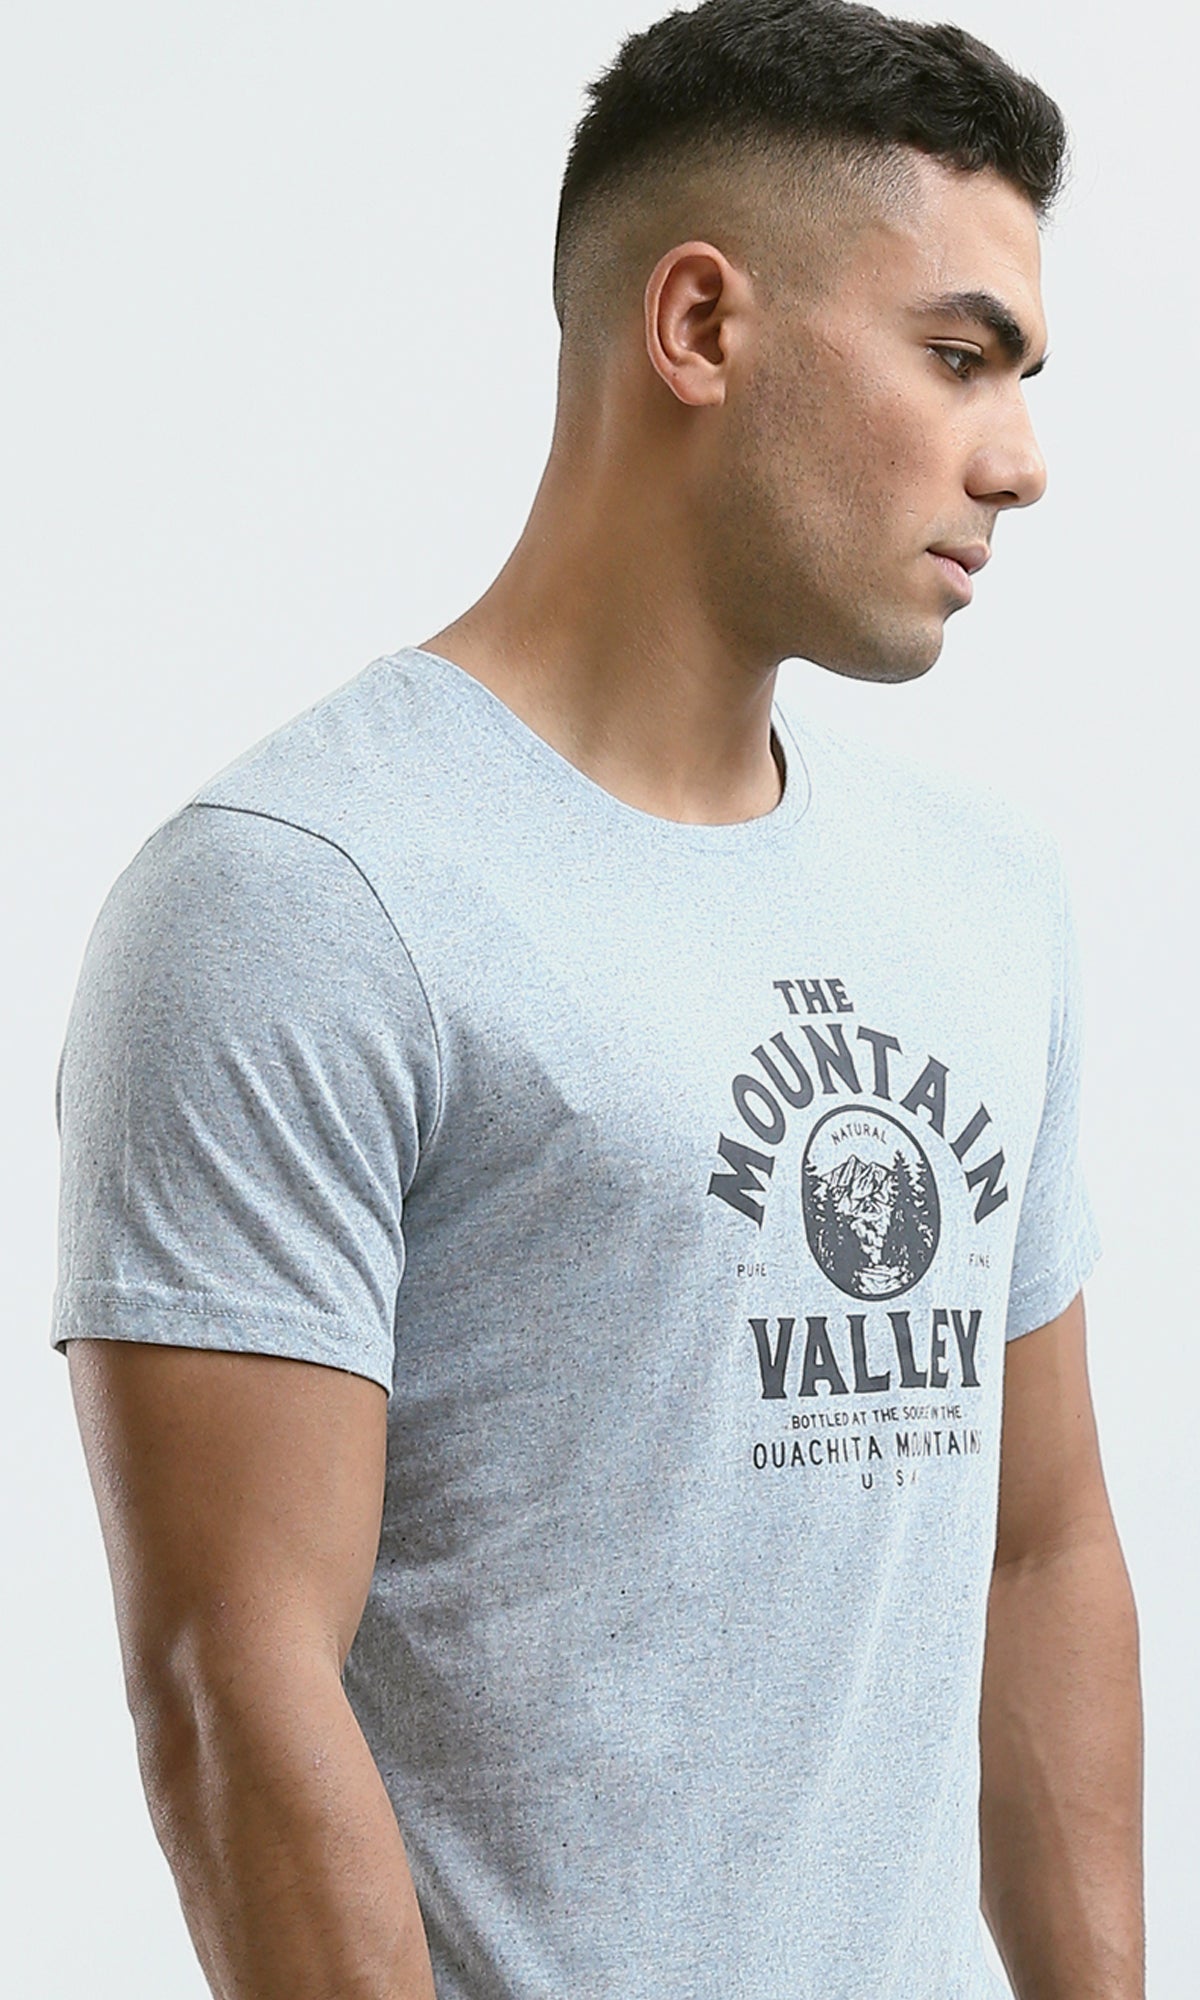 O182129 "The Mountain Valley" Printed Heather Light Blue Tee